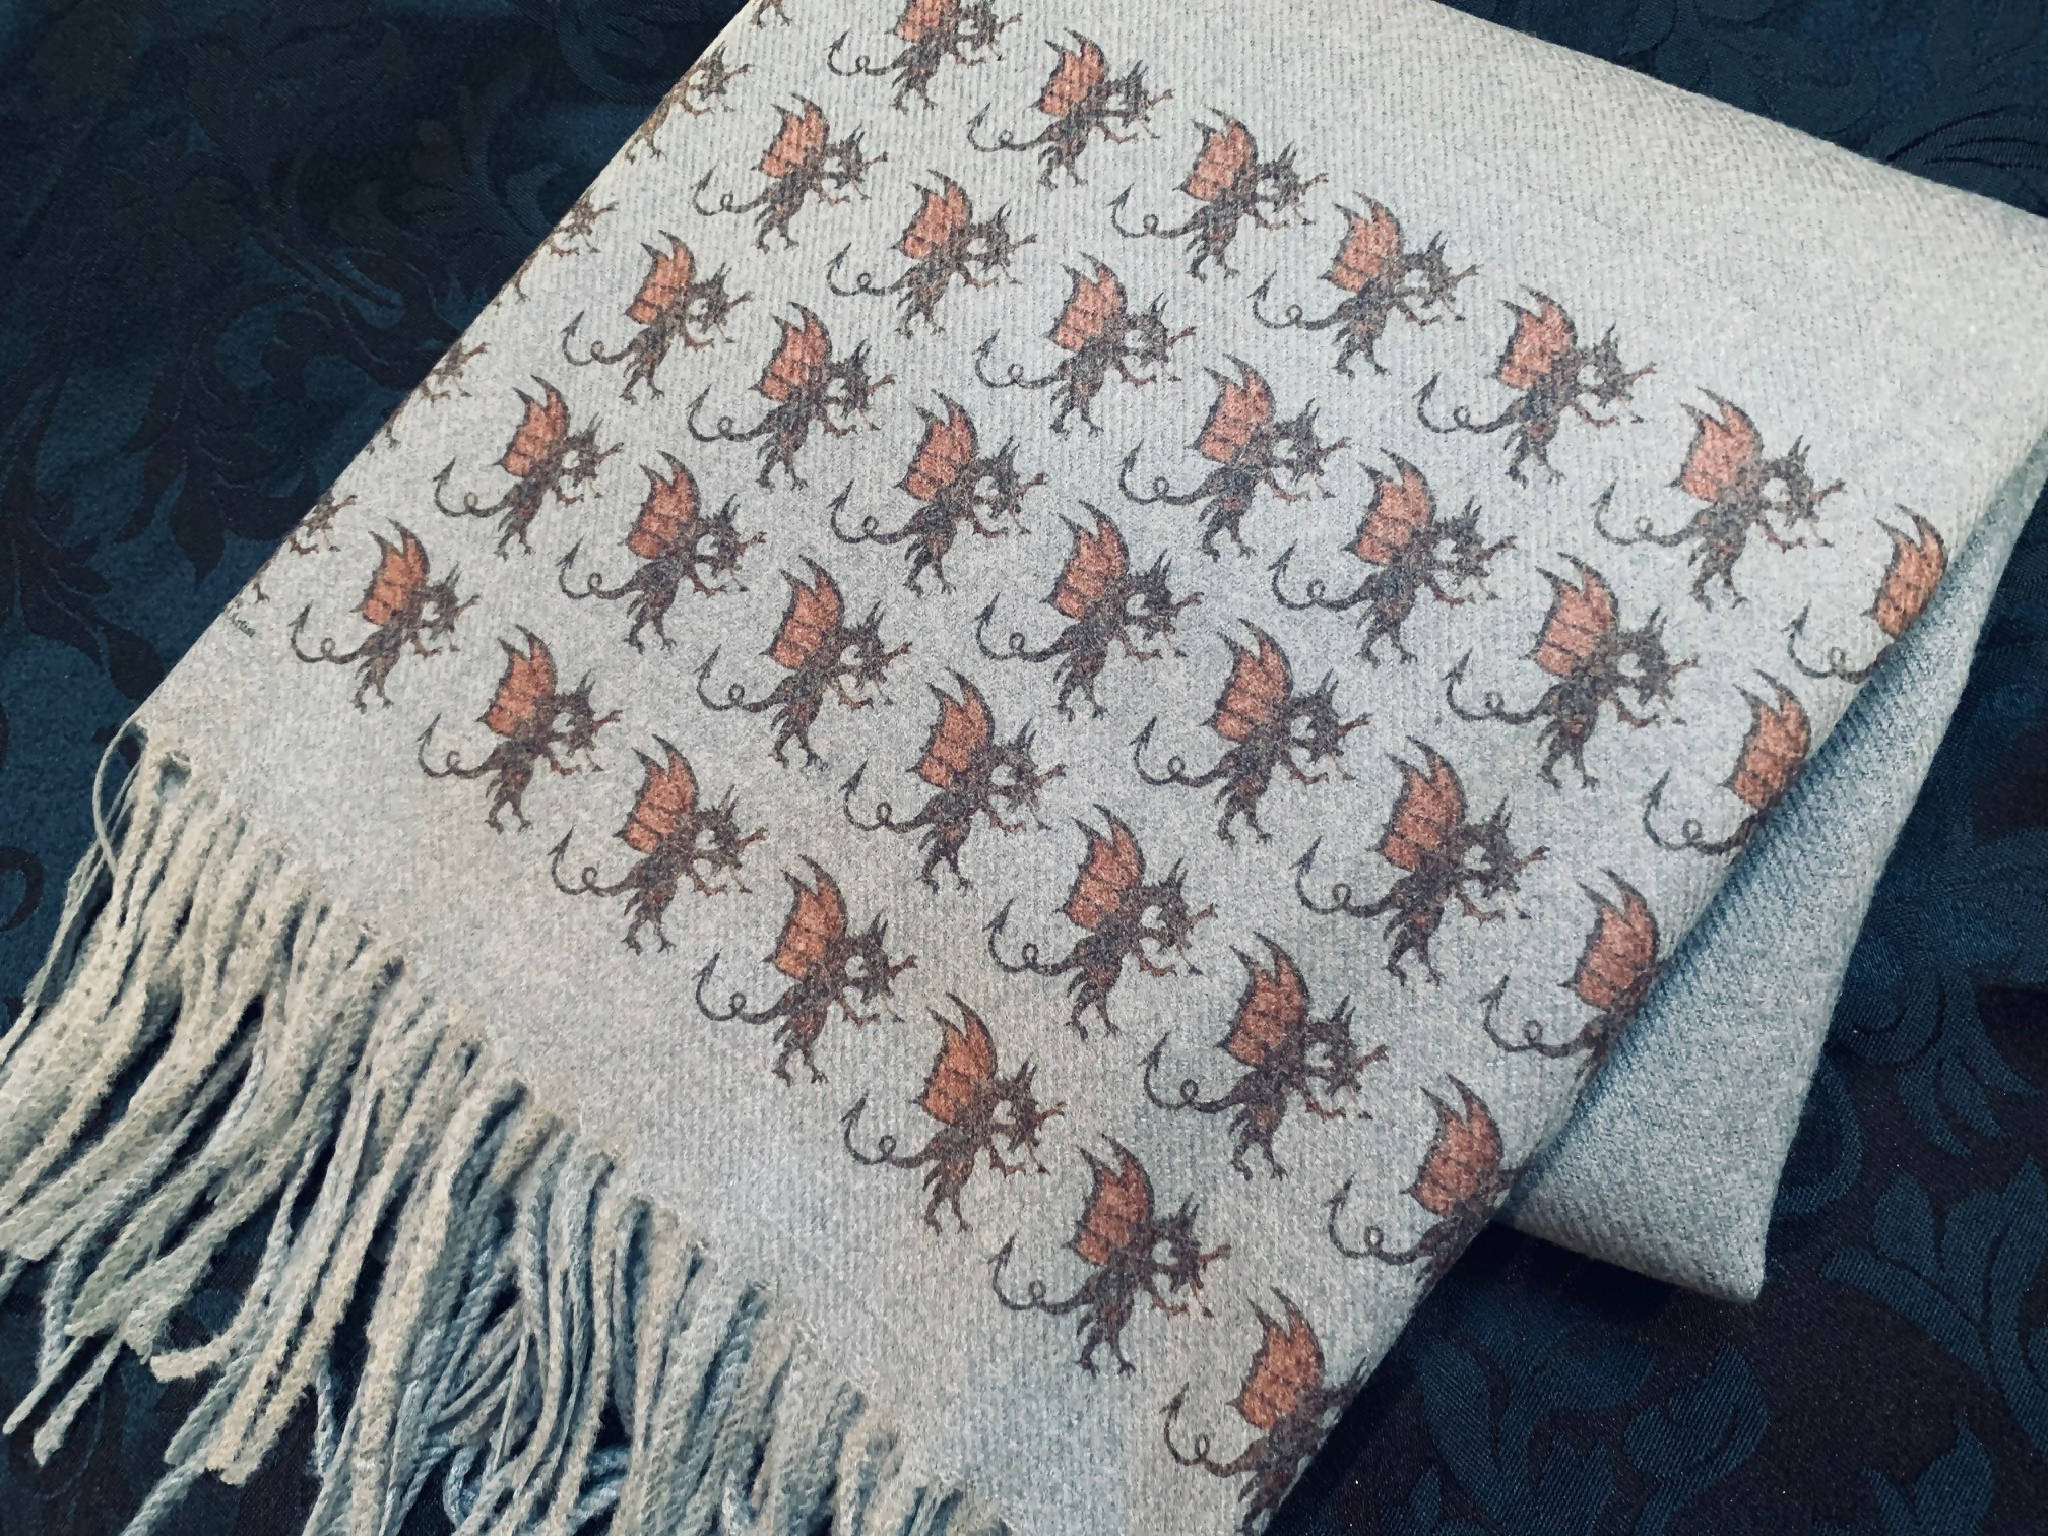 Dragons Handprinted on a Grey Cashmere Blend Scarf